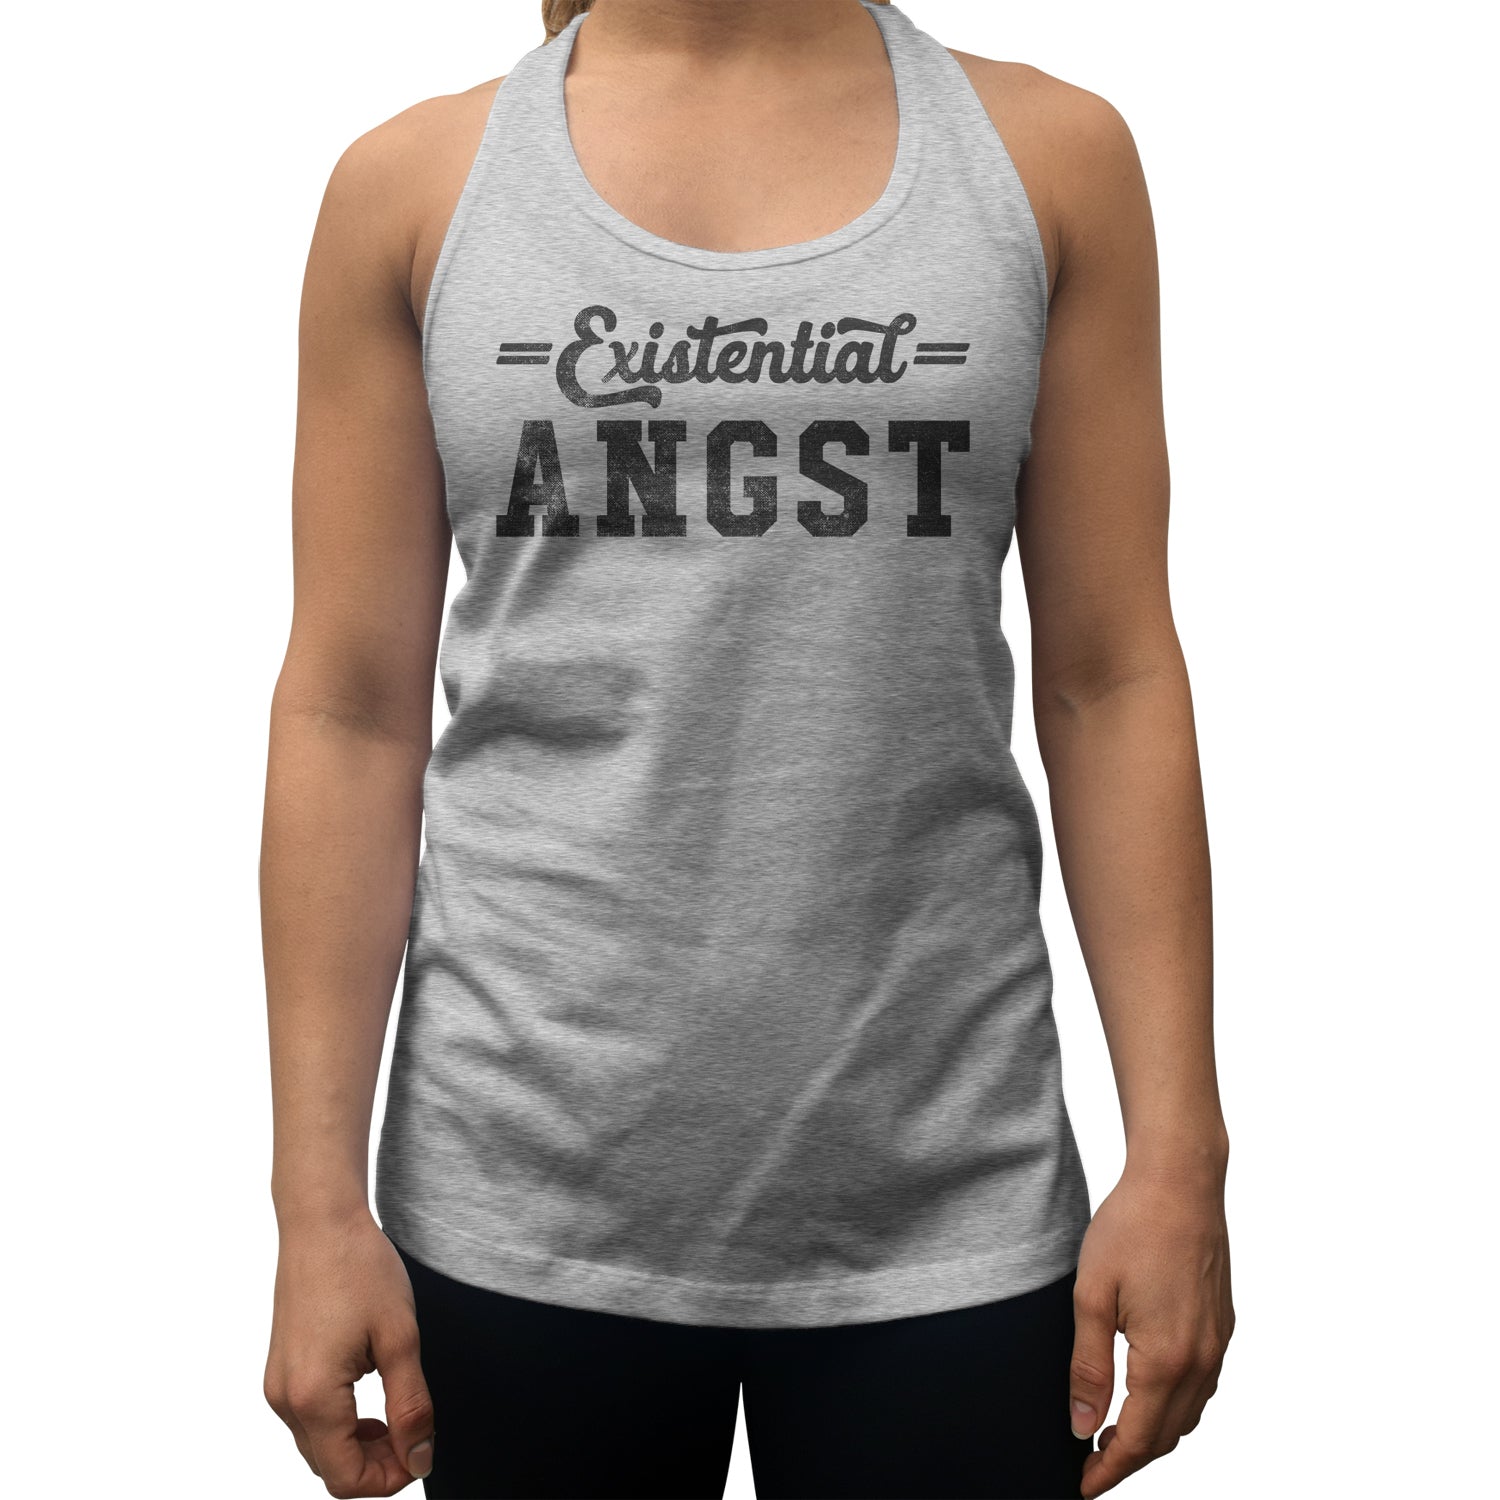 Women's Existential Angst Racerback Tank Top